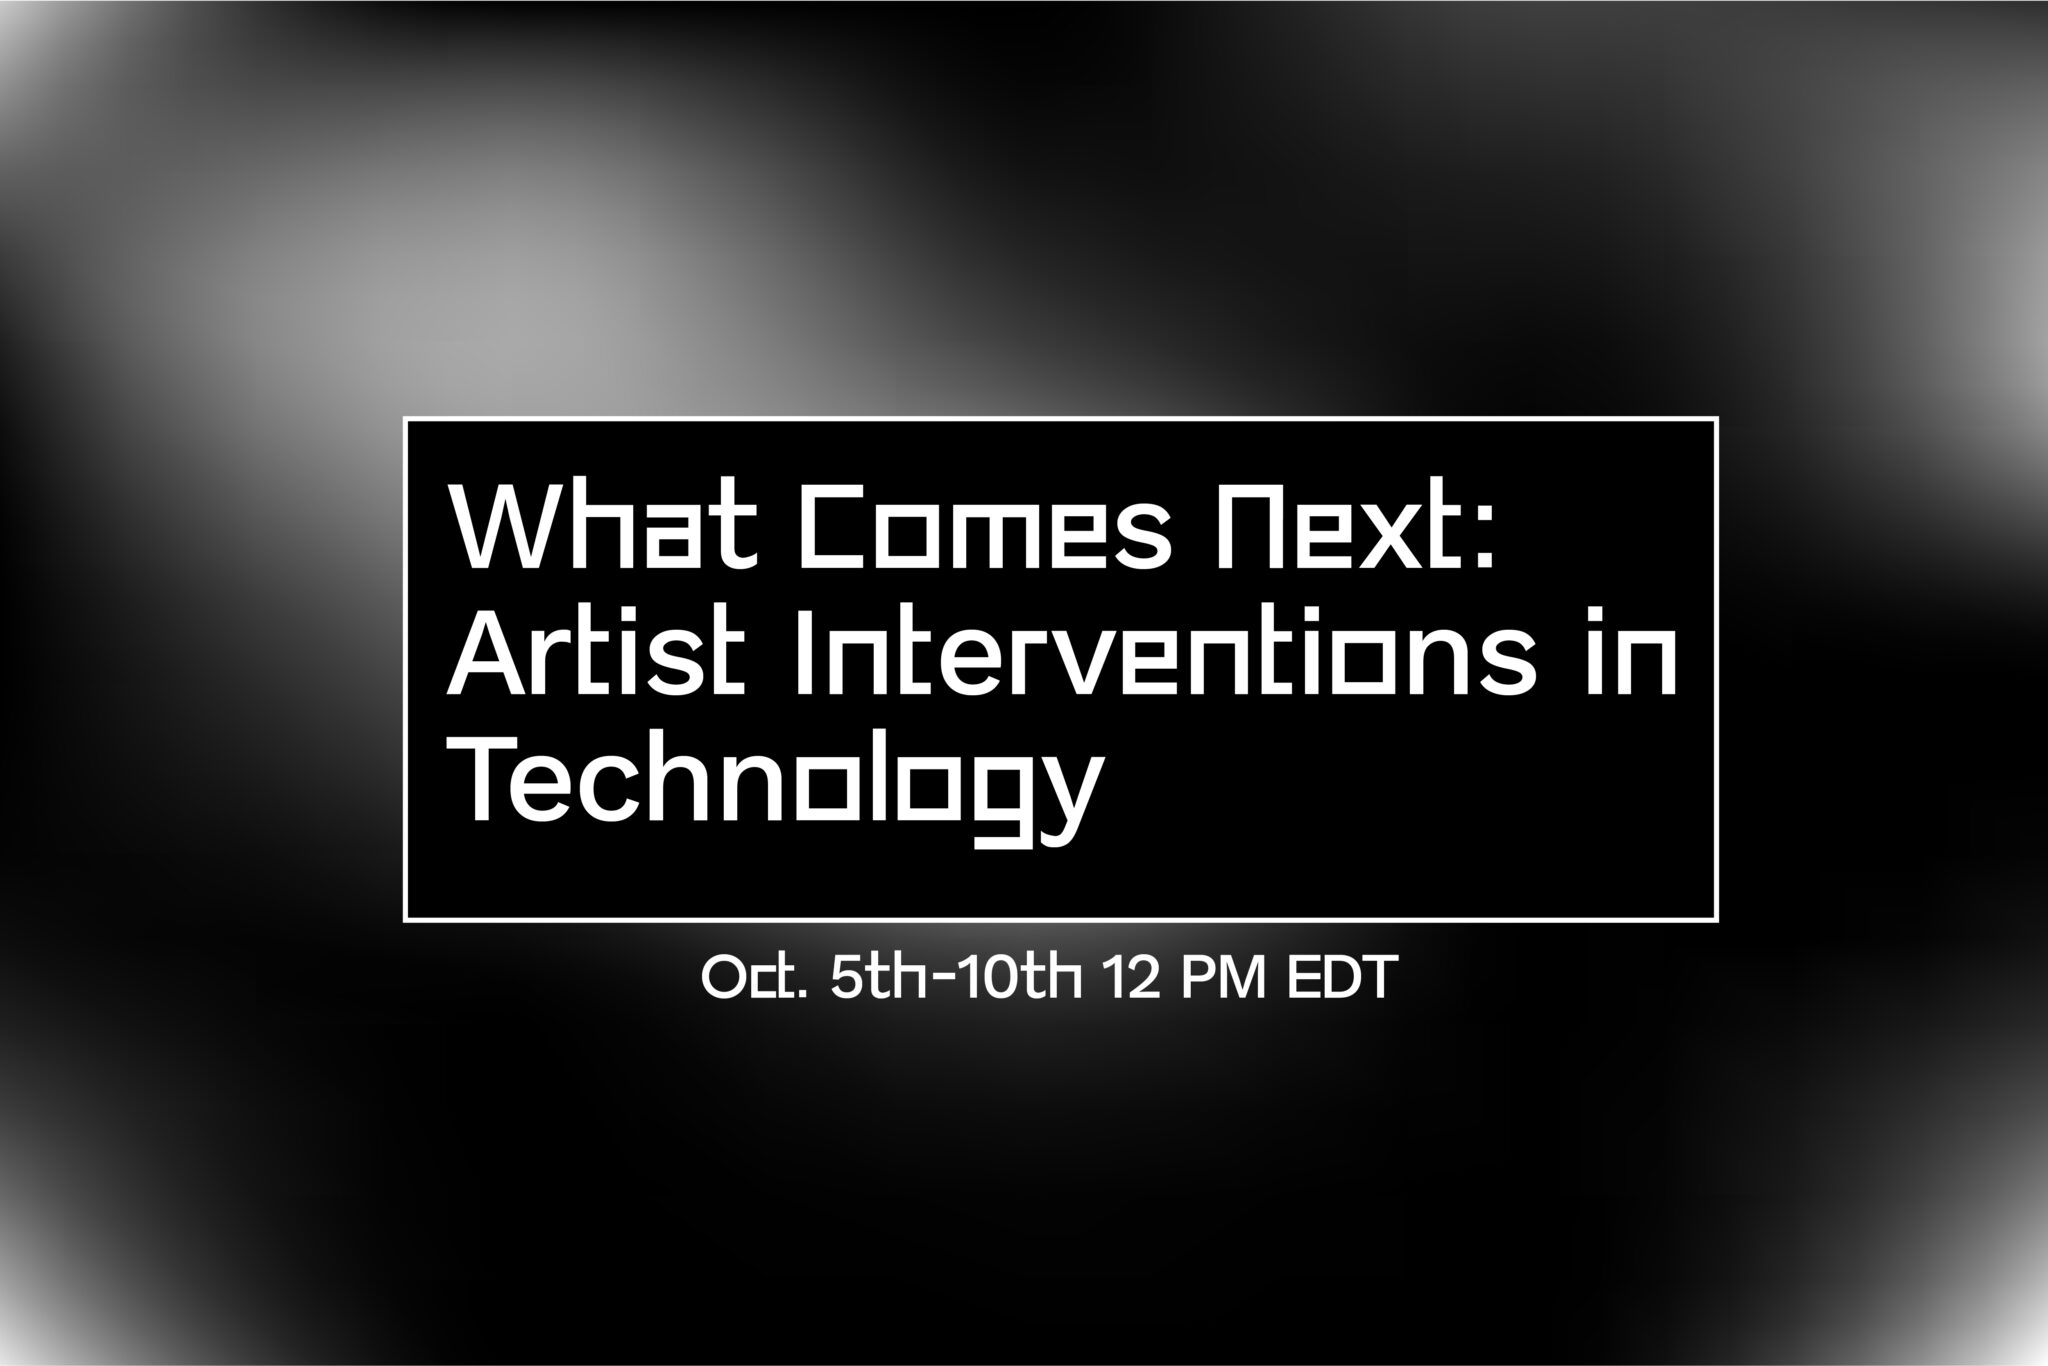 Pictured is a black and white graphic with text what says "What Comes Next: Artist Interventions in Technology, Oct. 5th - 10th". This is a promotional image for the virtual event for the phase I of rapid response program that took place in October 2020.